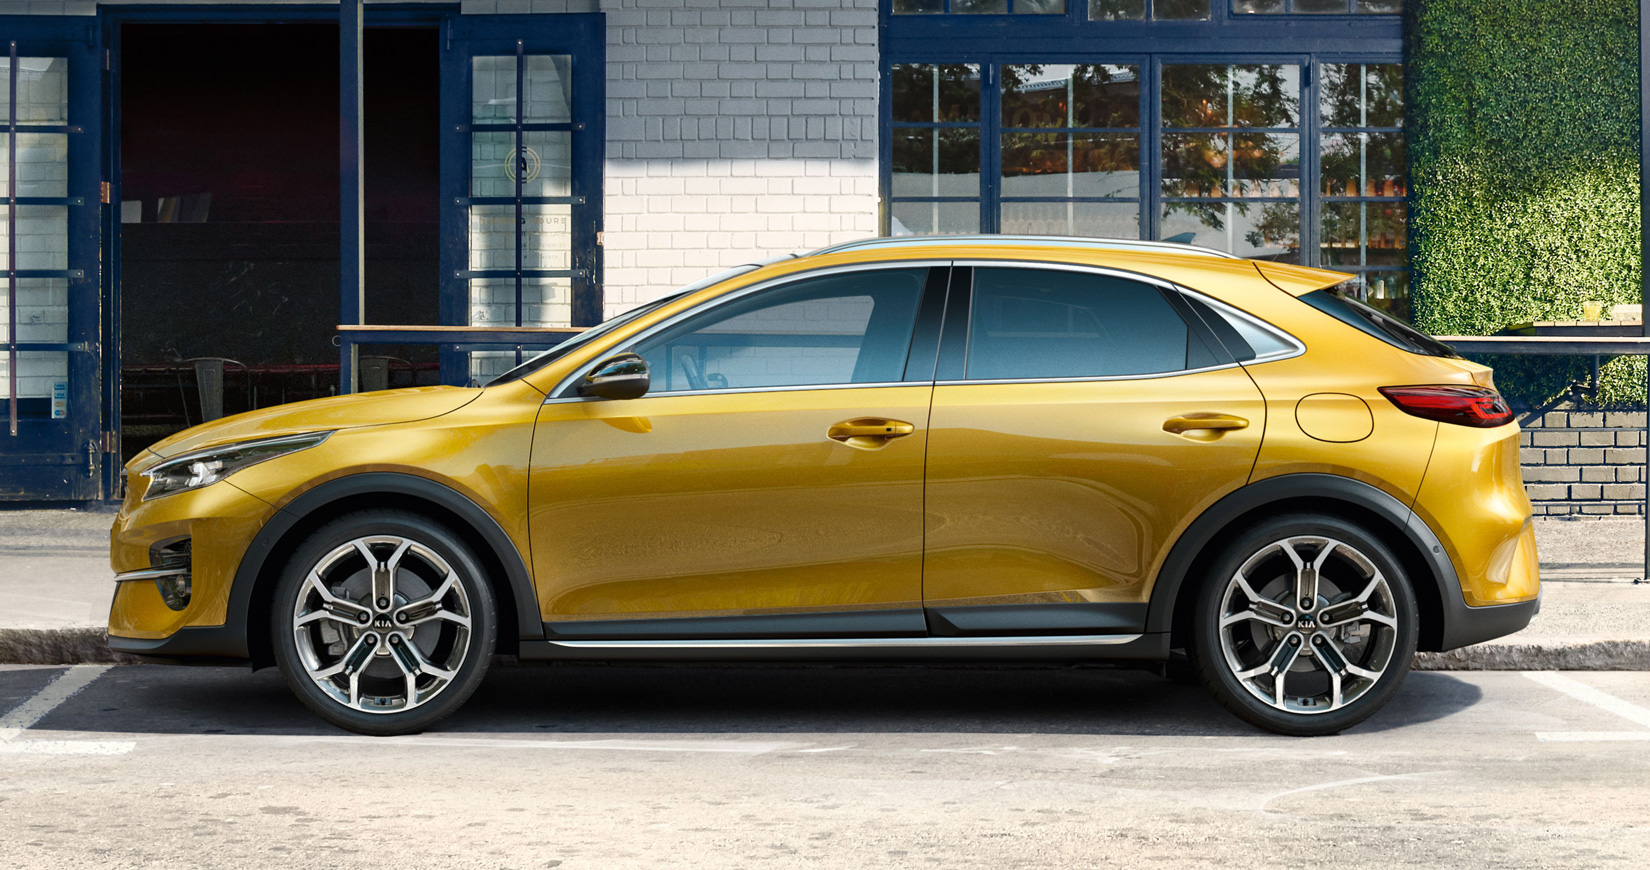 Kia XCeed urban crossover is one of the most stylish cars on the road today  - identity